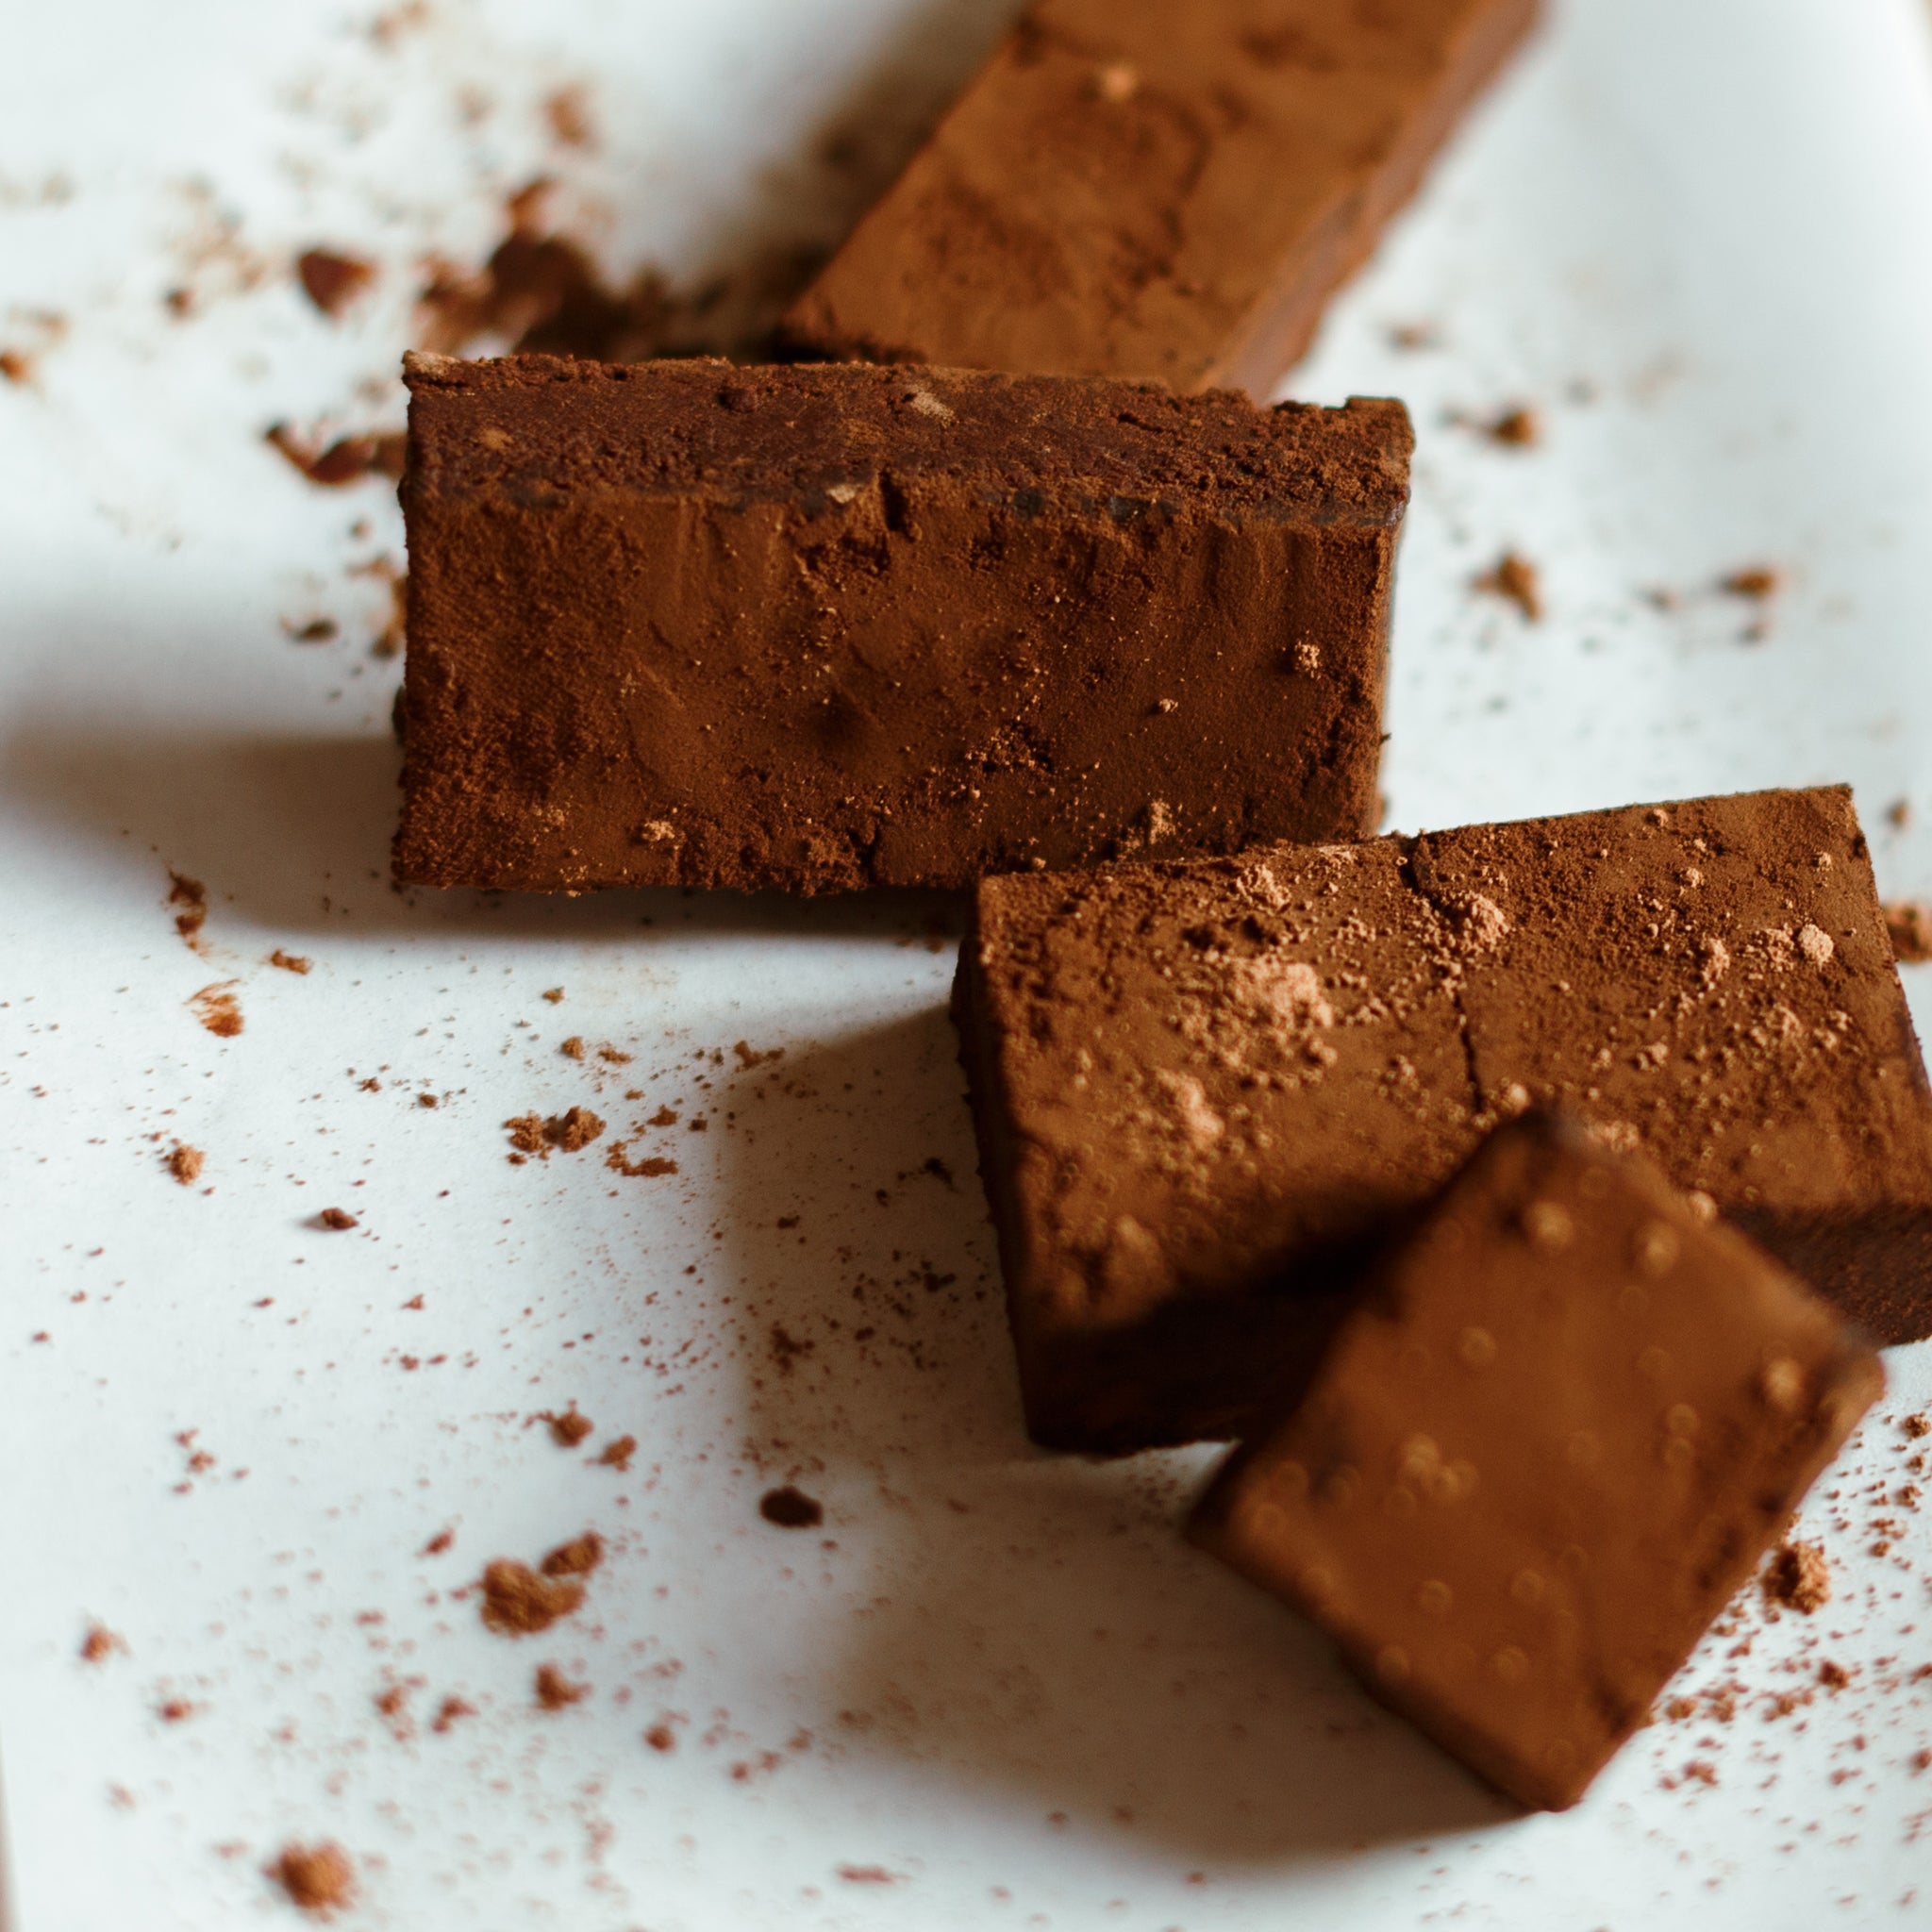 Ganache: The Creamy Confection with a Rich History